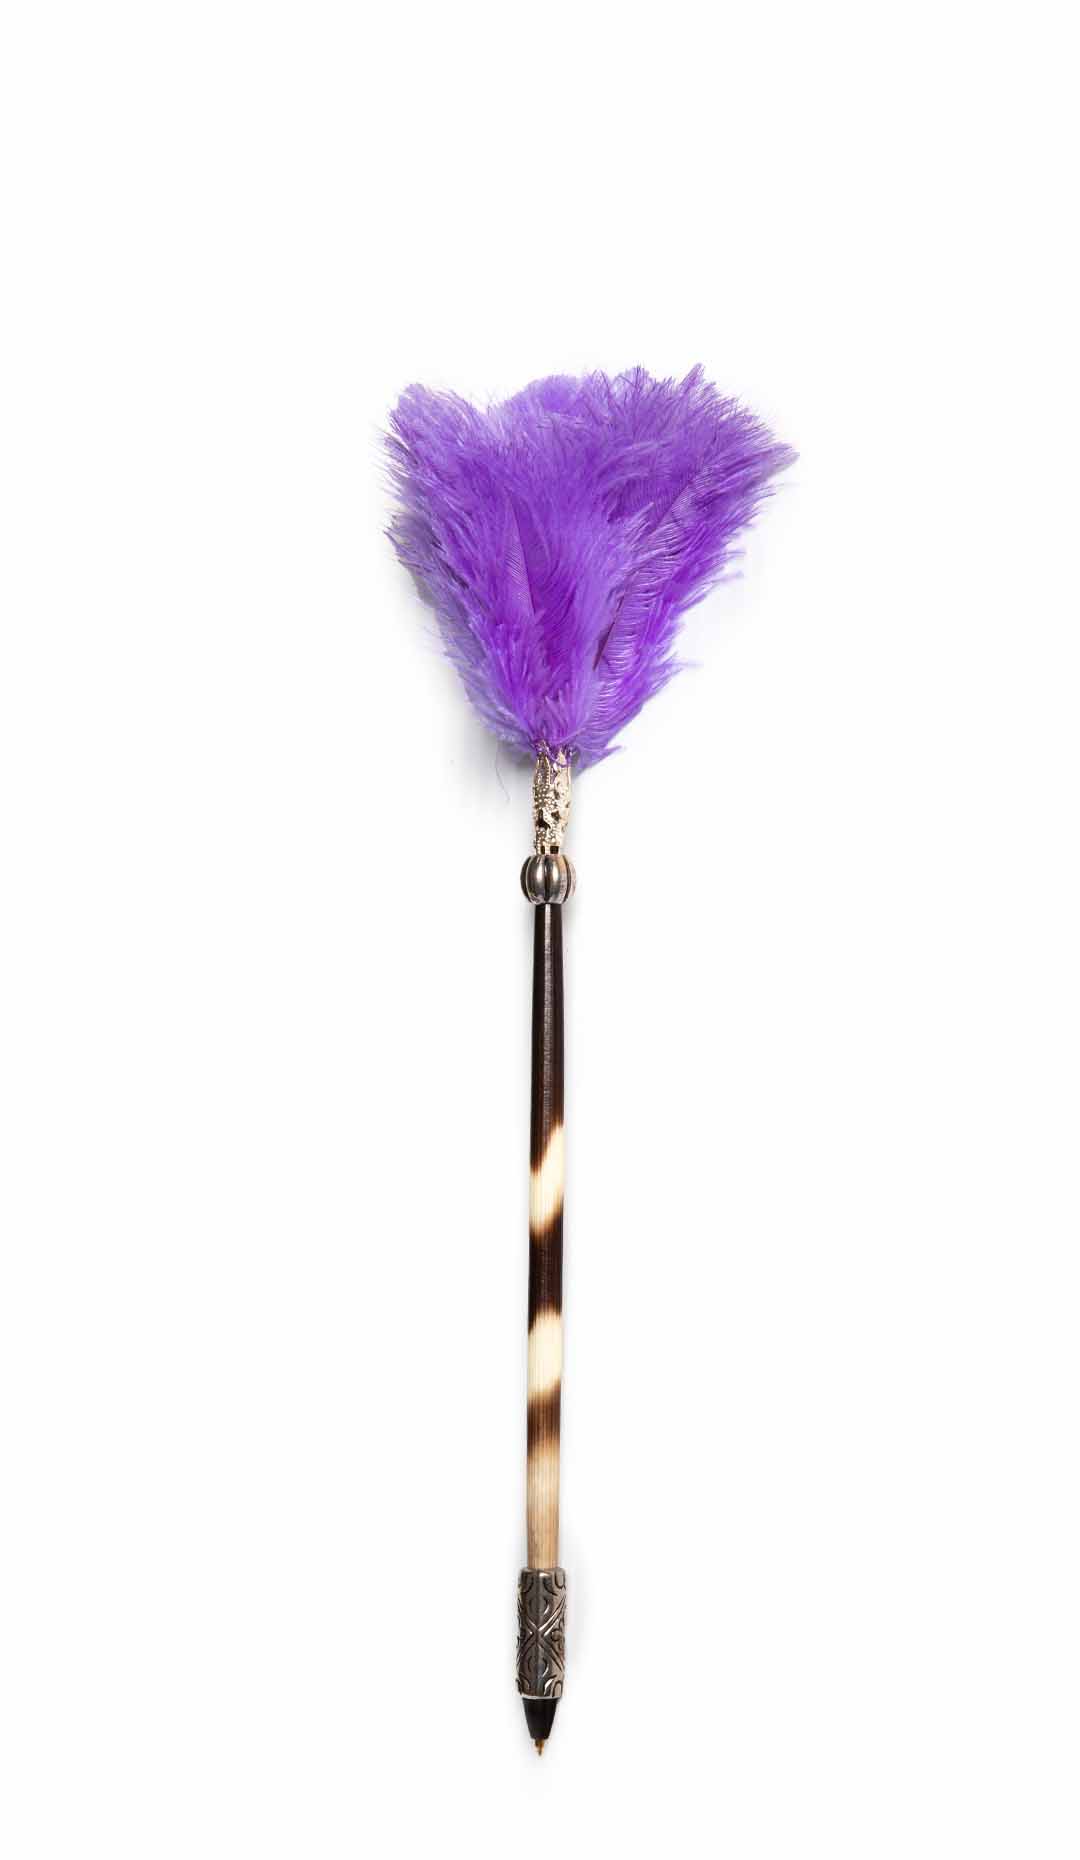 Porcupine Quill Pen W/ Purple Feathers